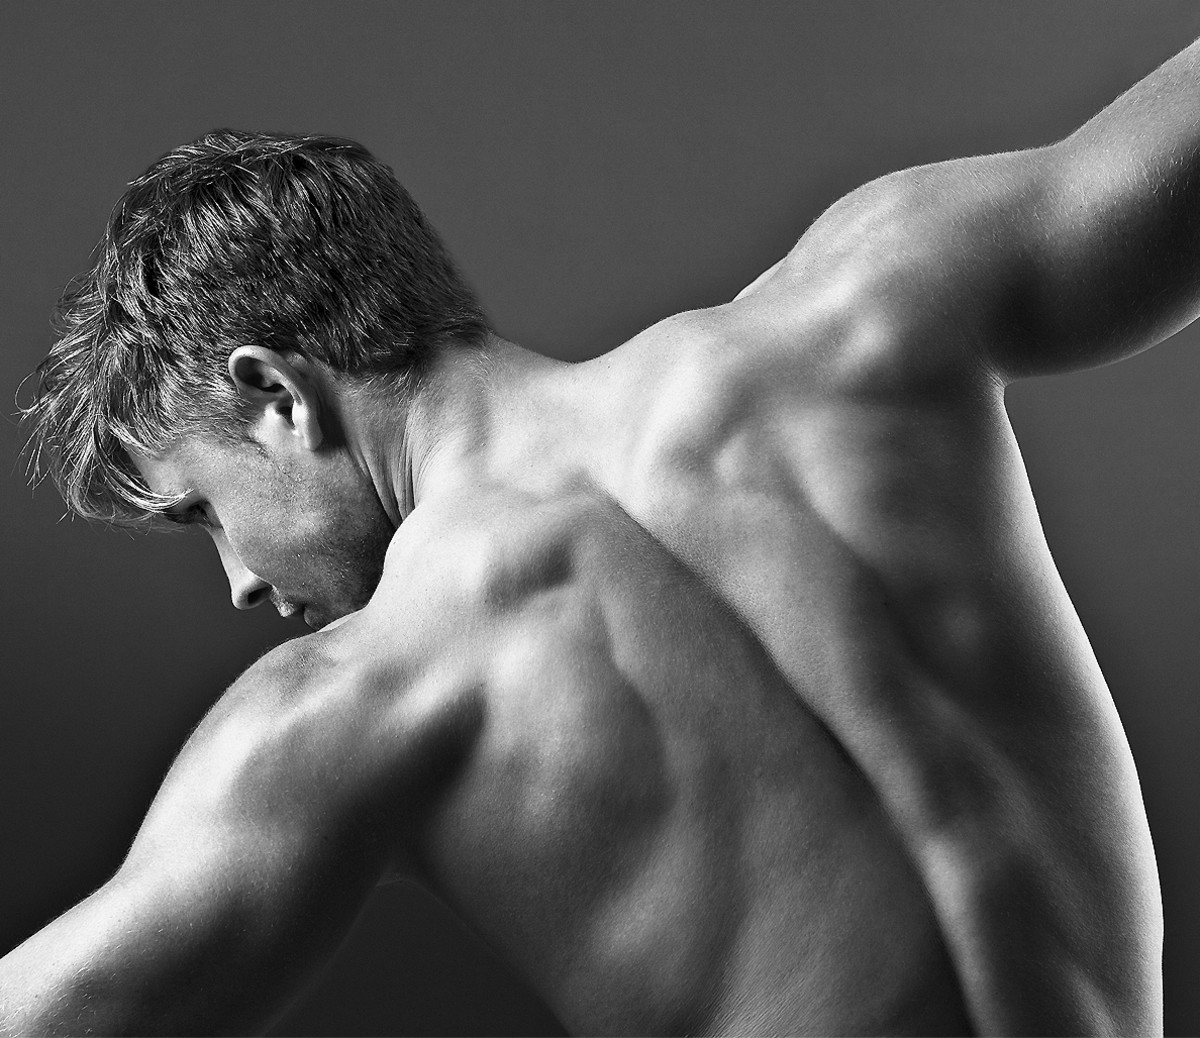 14 Best Trap Workouts - Exercises for Trapezius Back Muscles